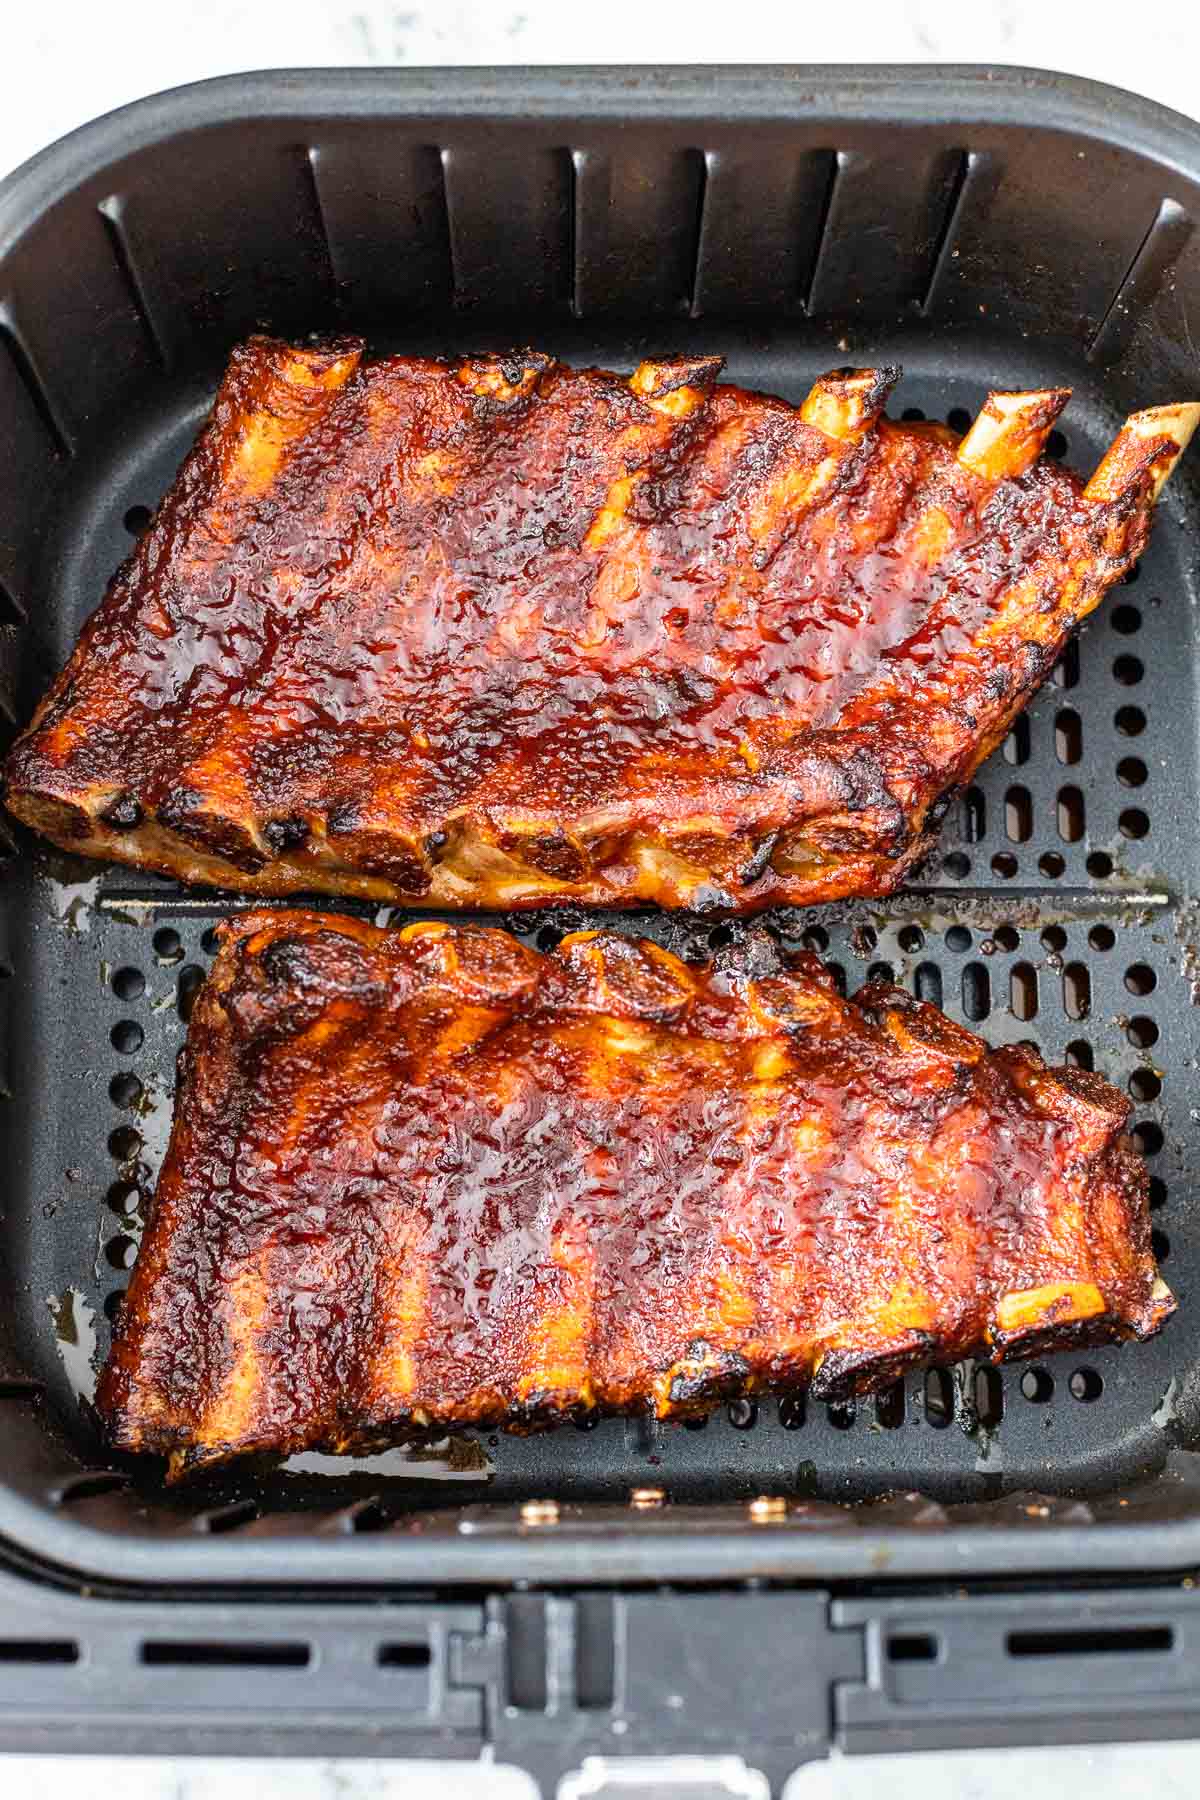 A cooked rack of ribs in an air fryer basket